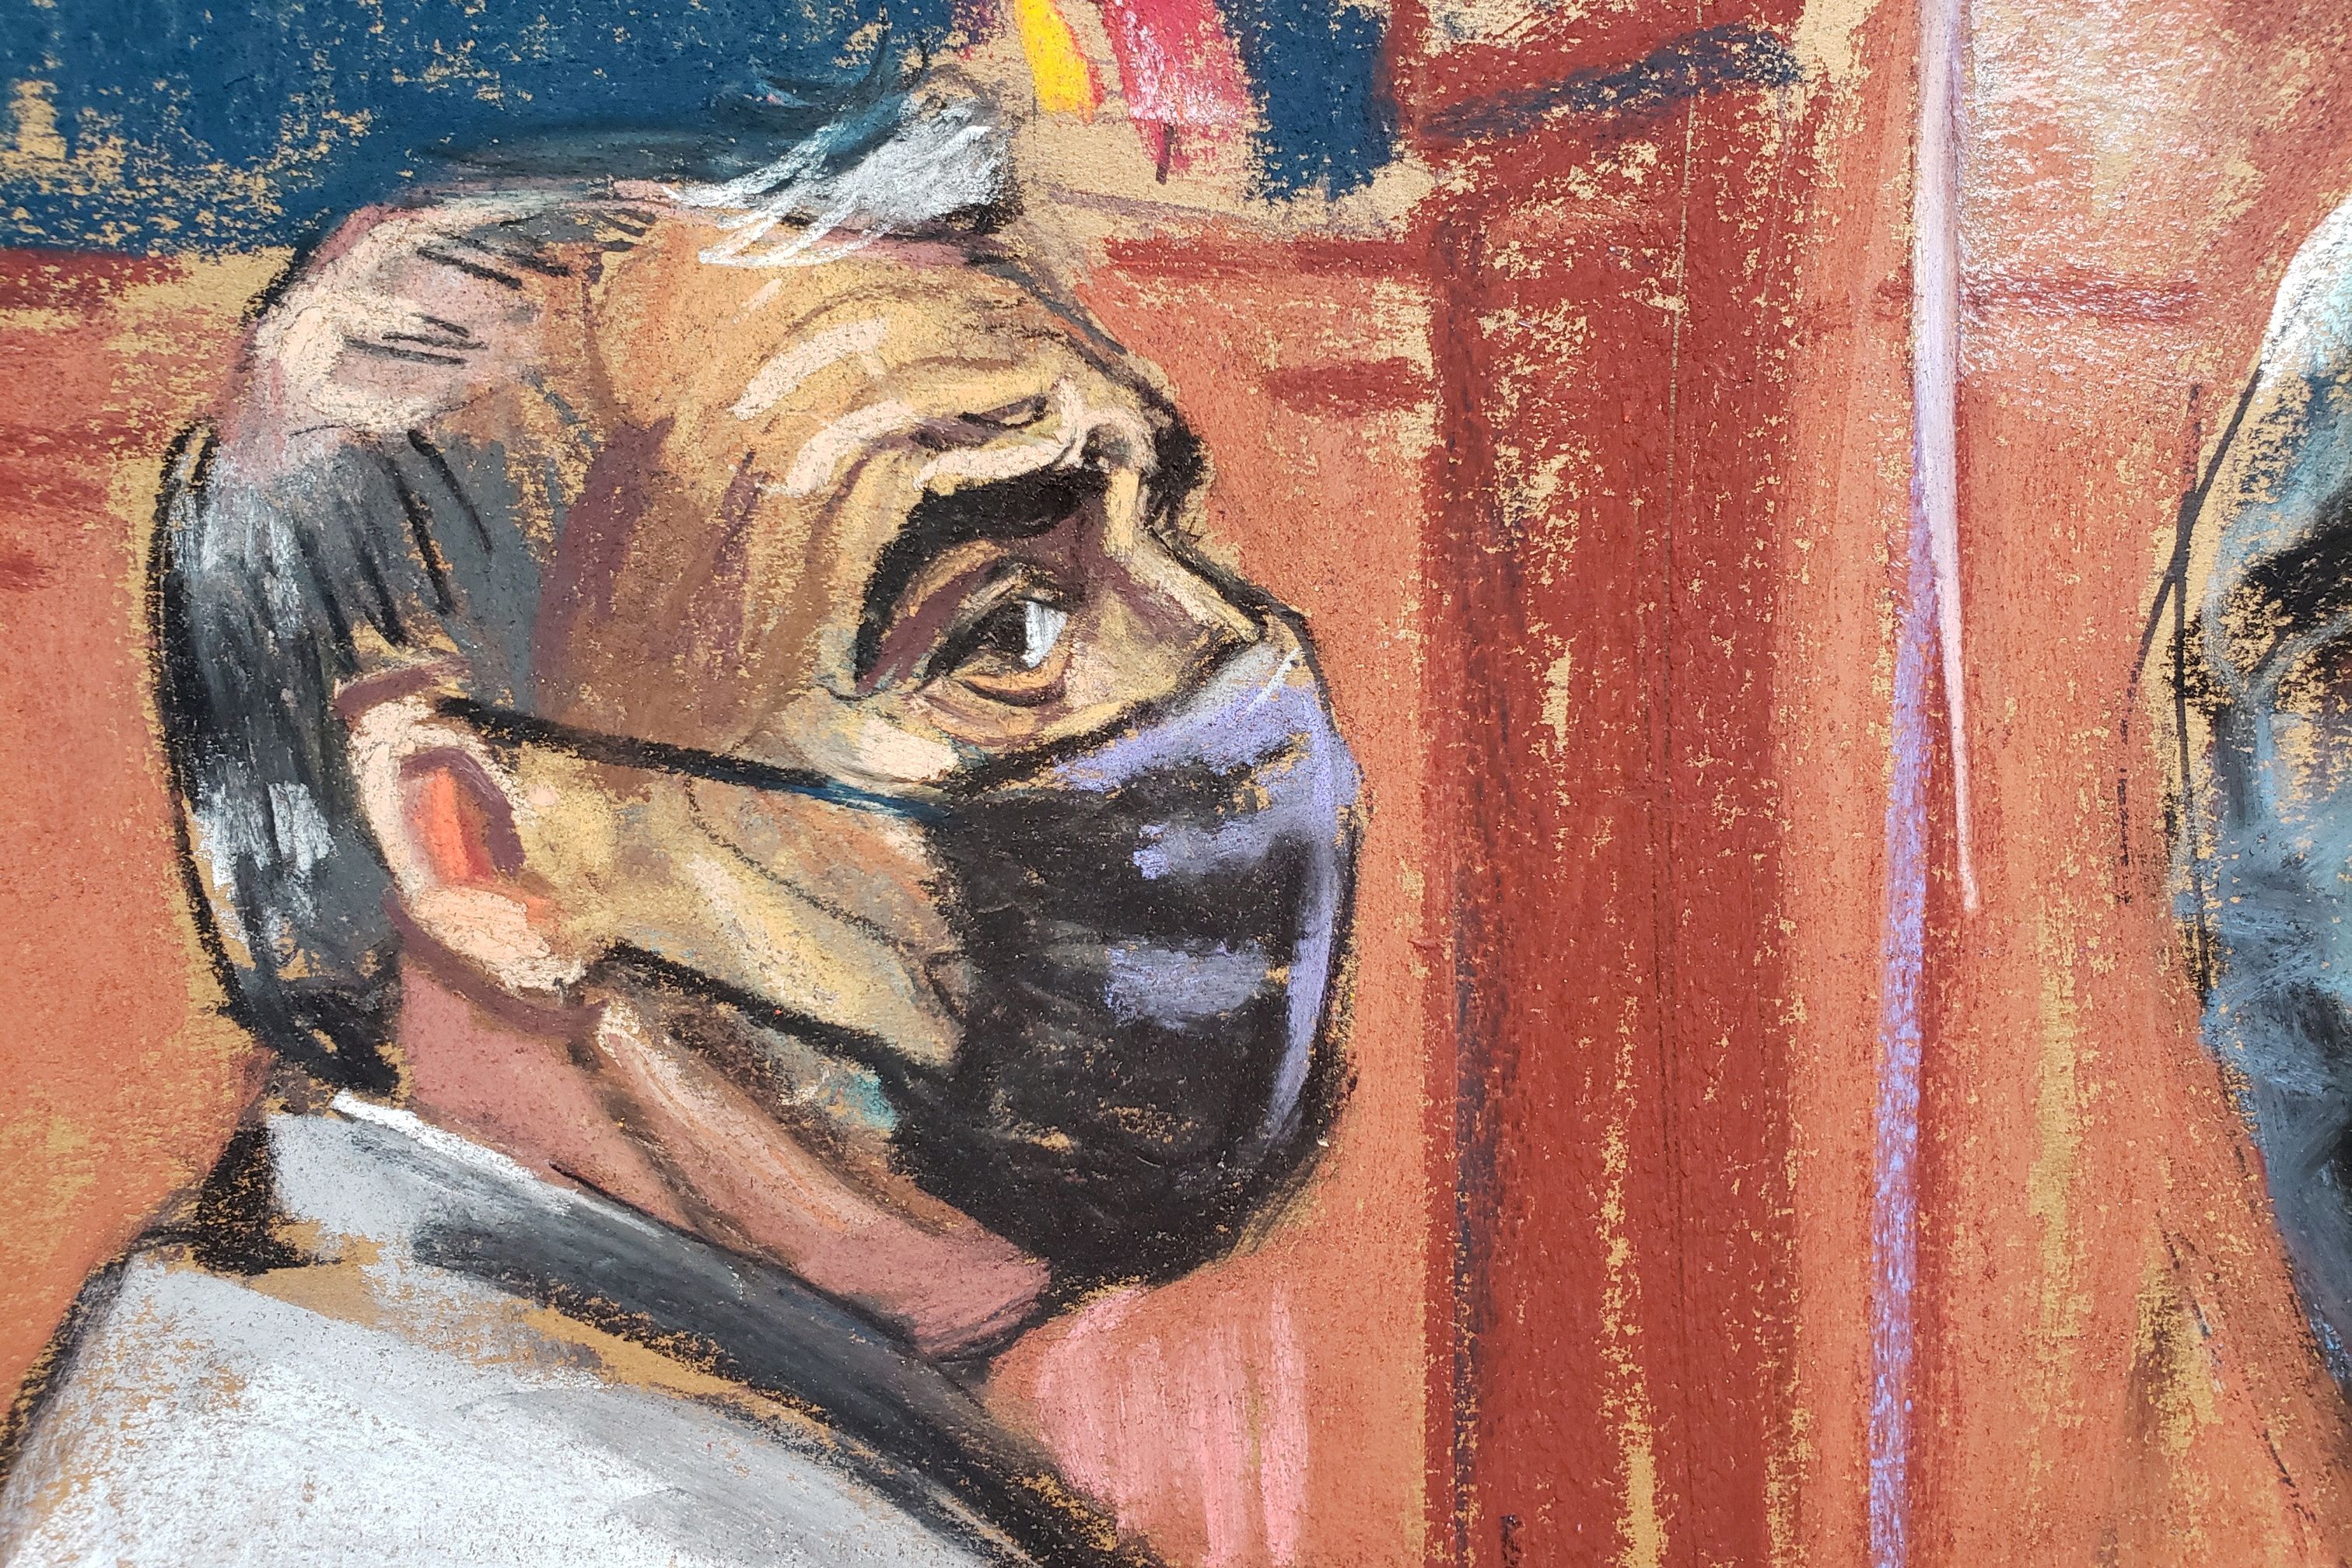 Lev Parnas, a Ukrainian-American businessman and former Giuliani associate, sits during his trial on charges of violating campaign finance laws in a courtroom sketch in New York City, U.S., October 13, 2021. REUTERS/Jane Rosenberg